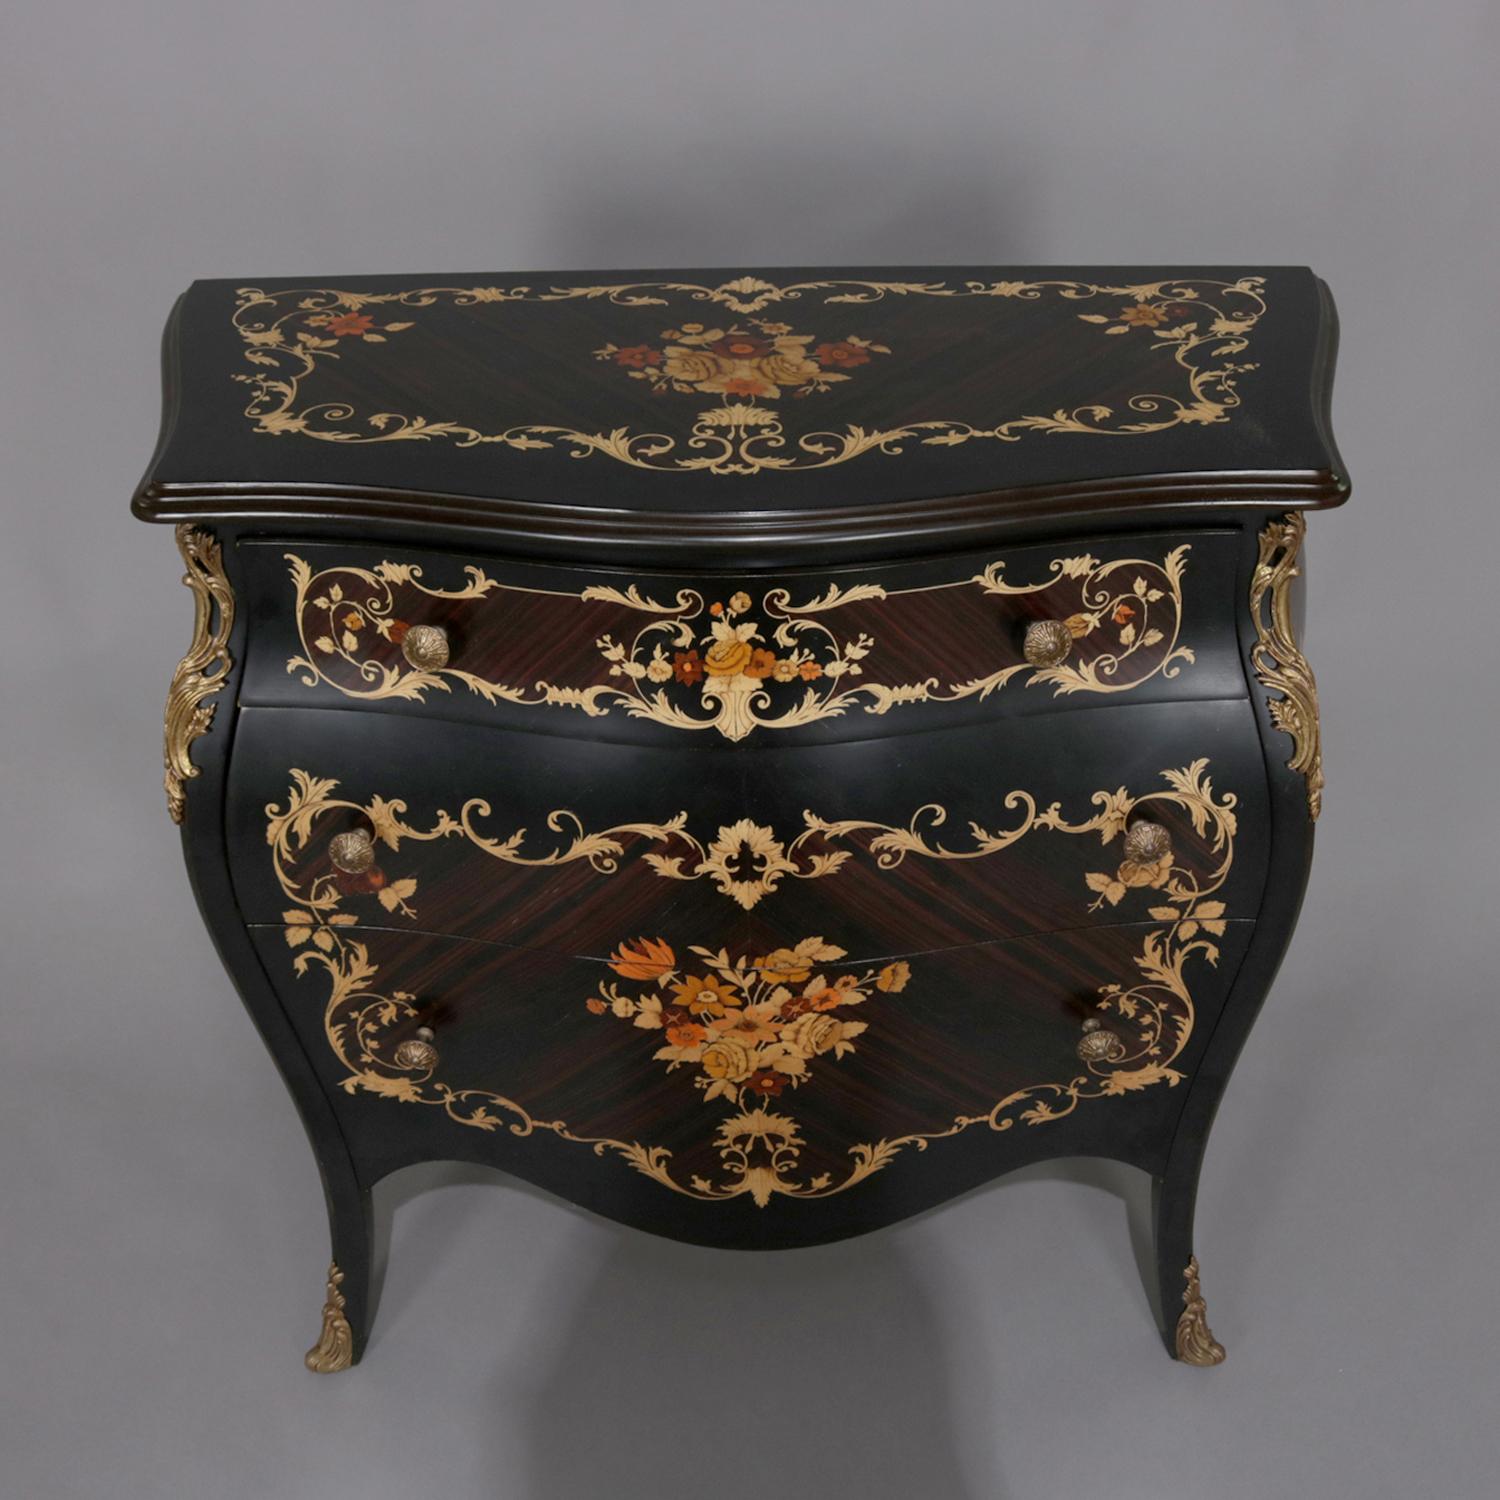 Vintage French Louis XVI style commode features ebonized wood construction in bombe form with three drawers and all-over painted and gilt floral, foliate and scroll design, seated on tapered concave legs with foliate cast ormolu mounts, 20th